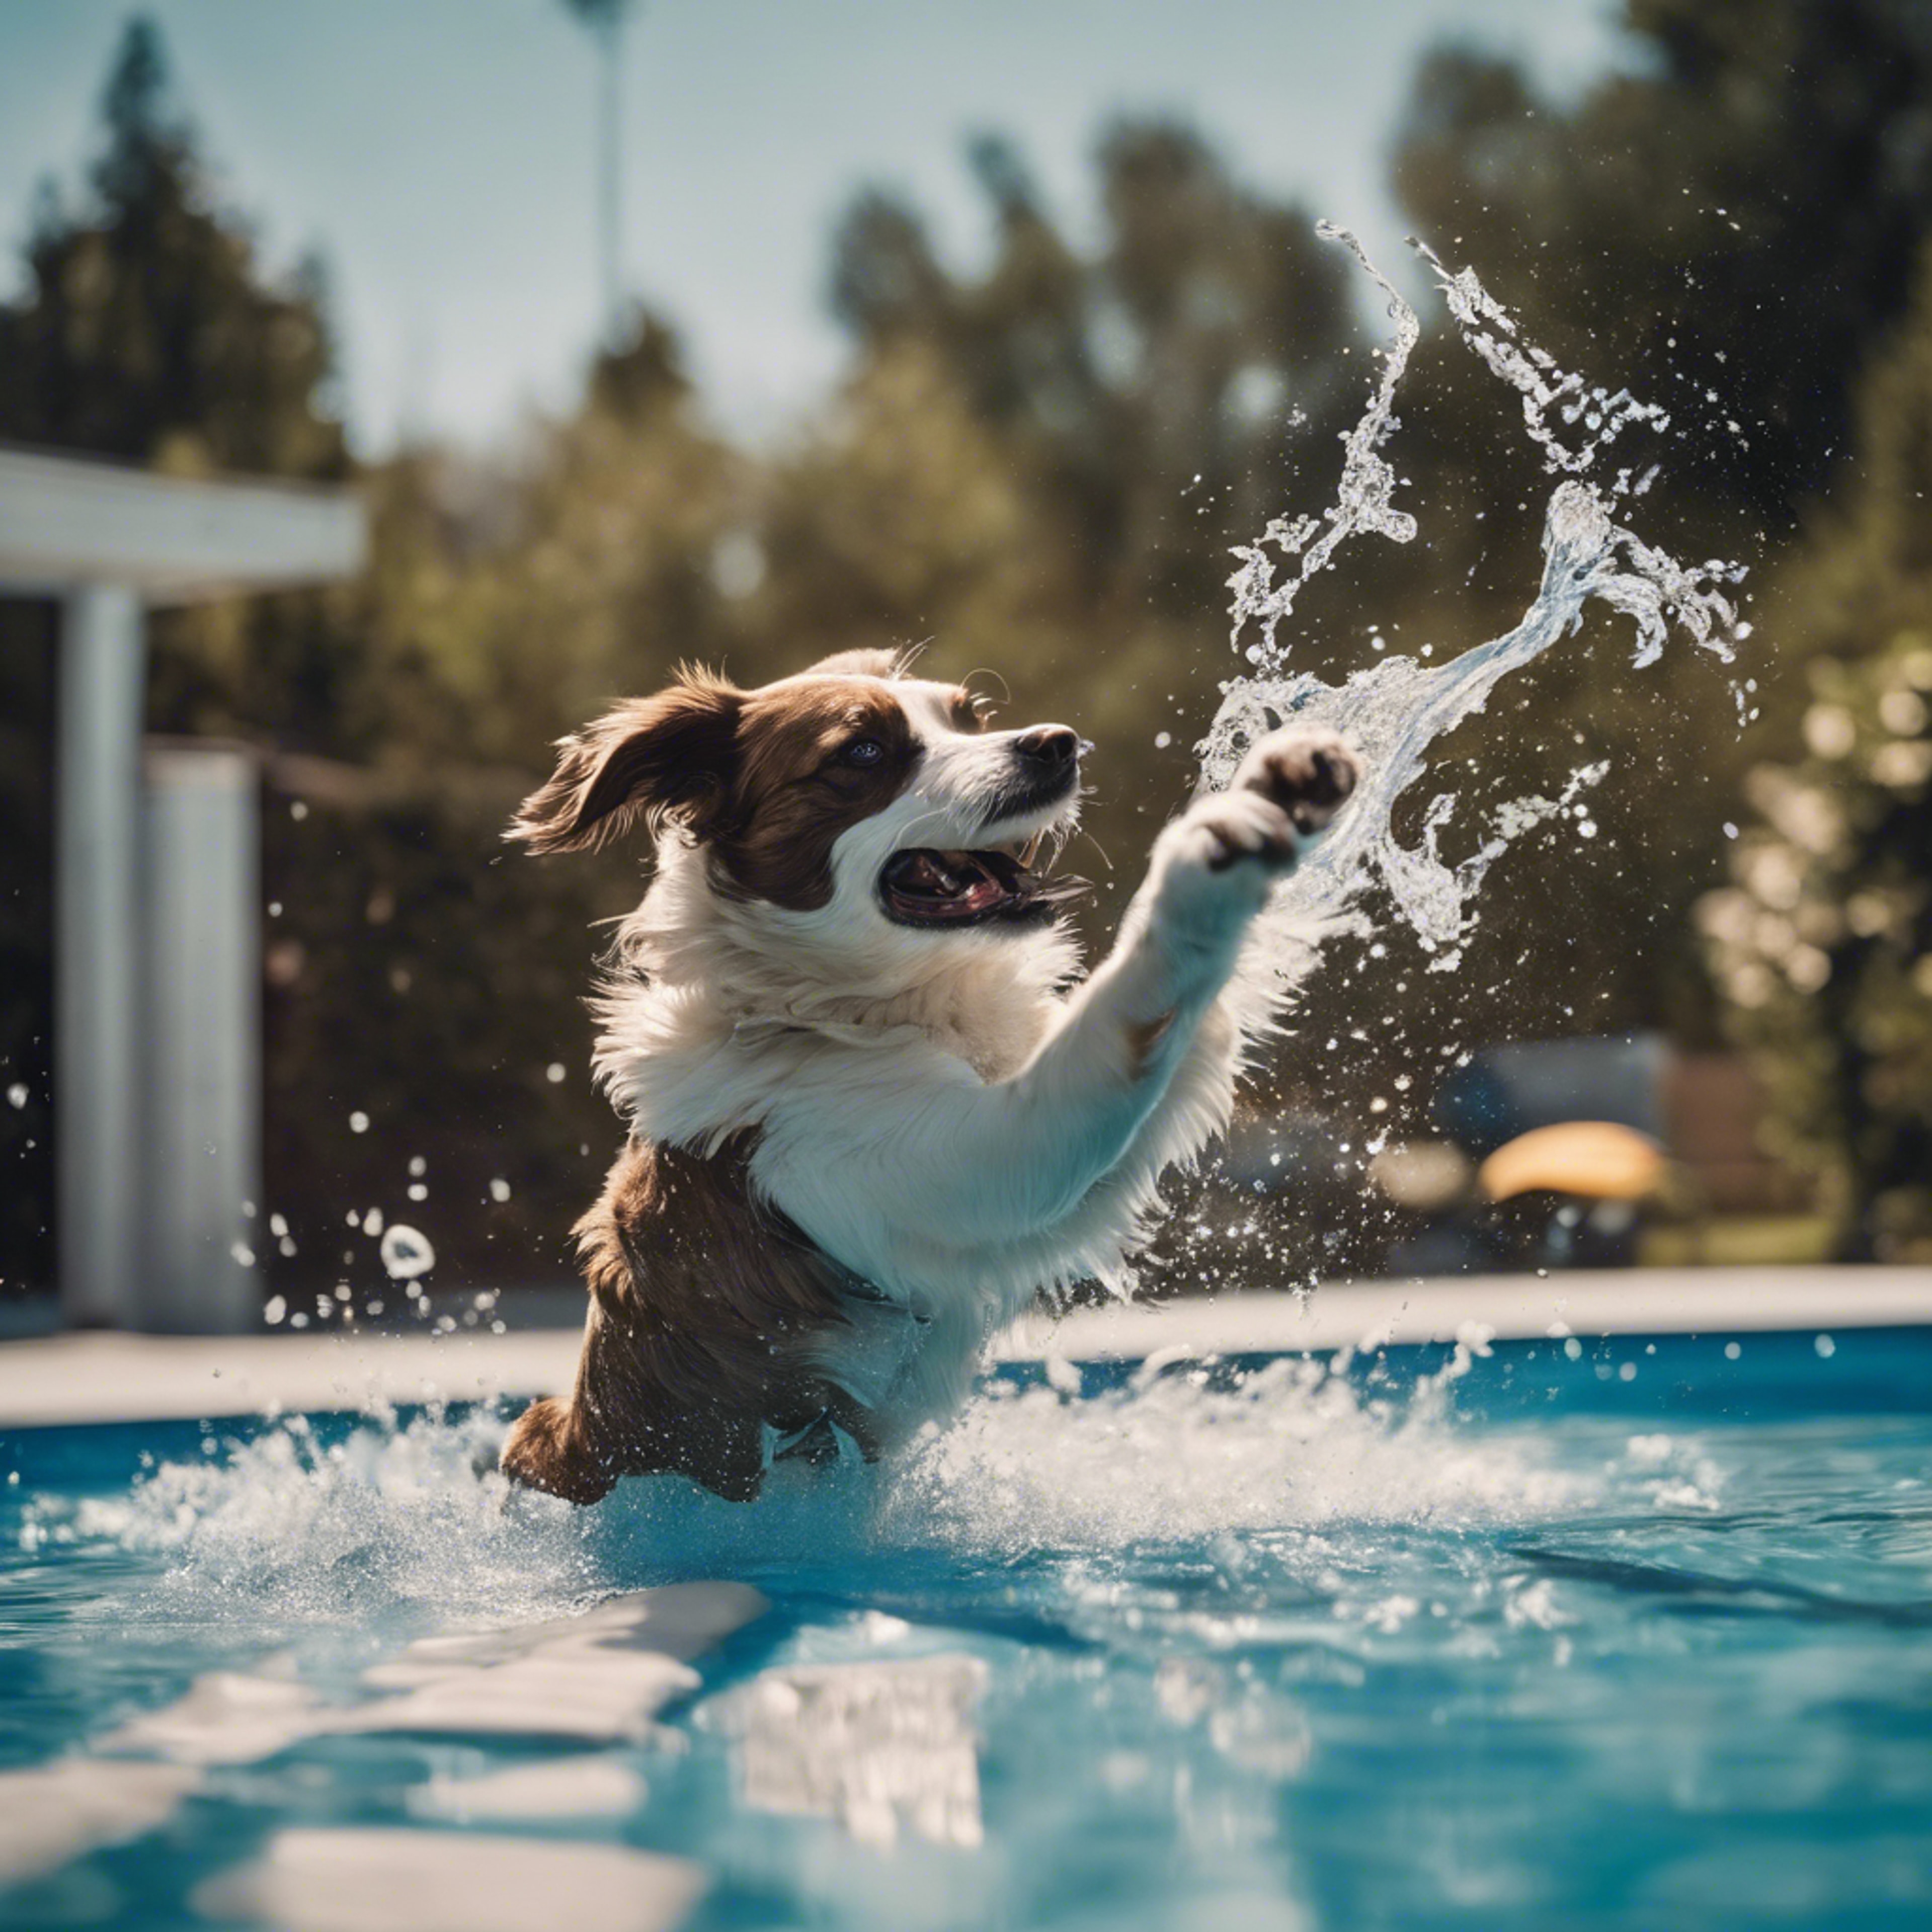 A dog jumping into a pool chasing after a frisbee壁紙[2bbec0a442374b769d95]